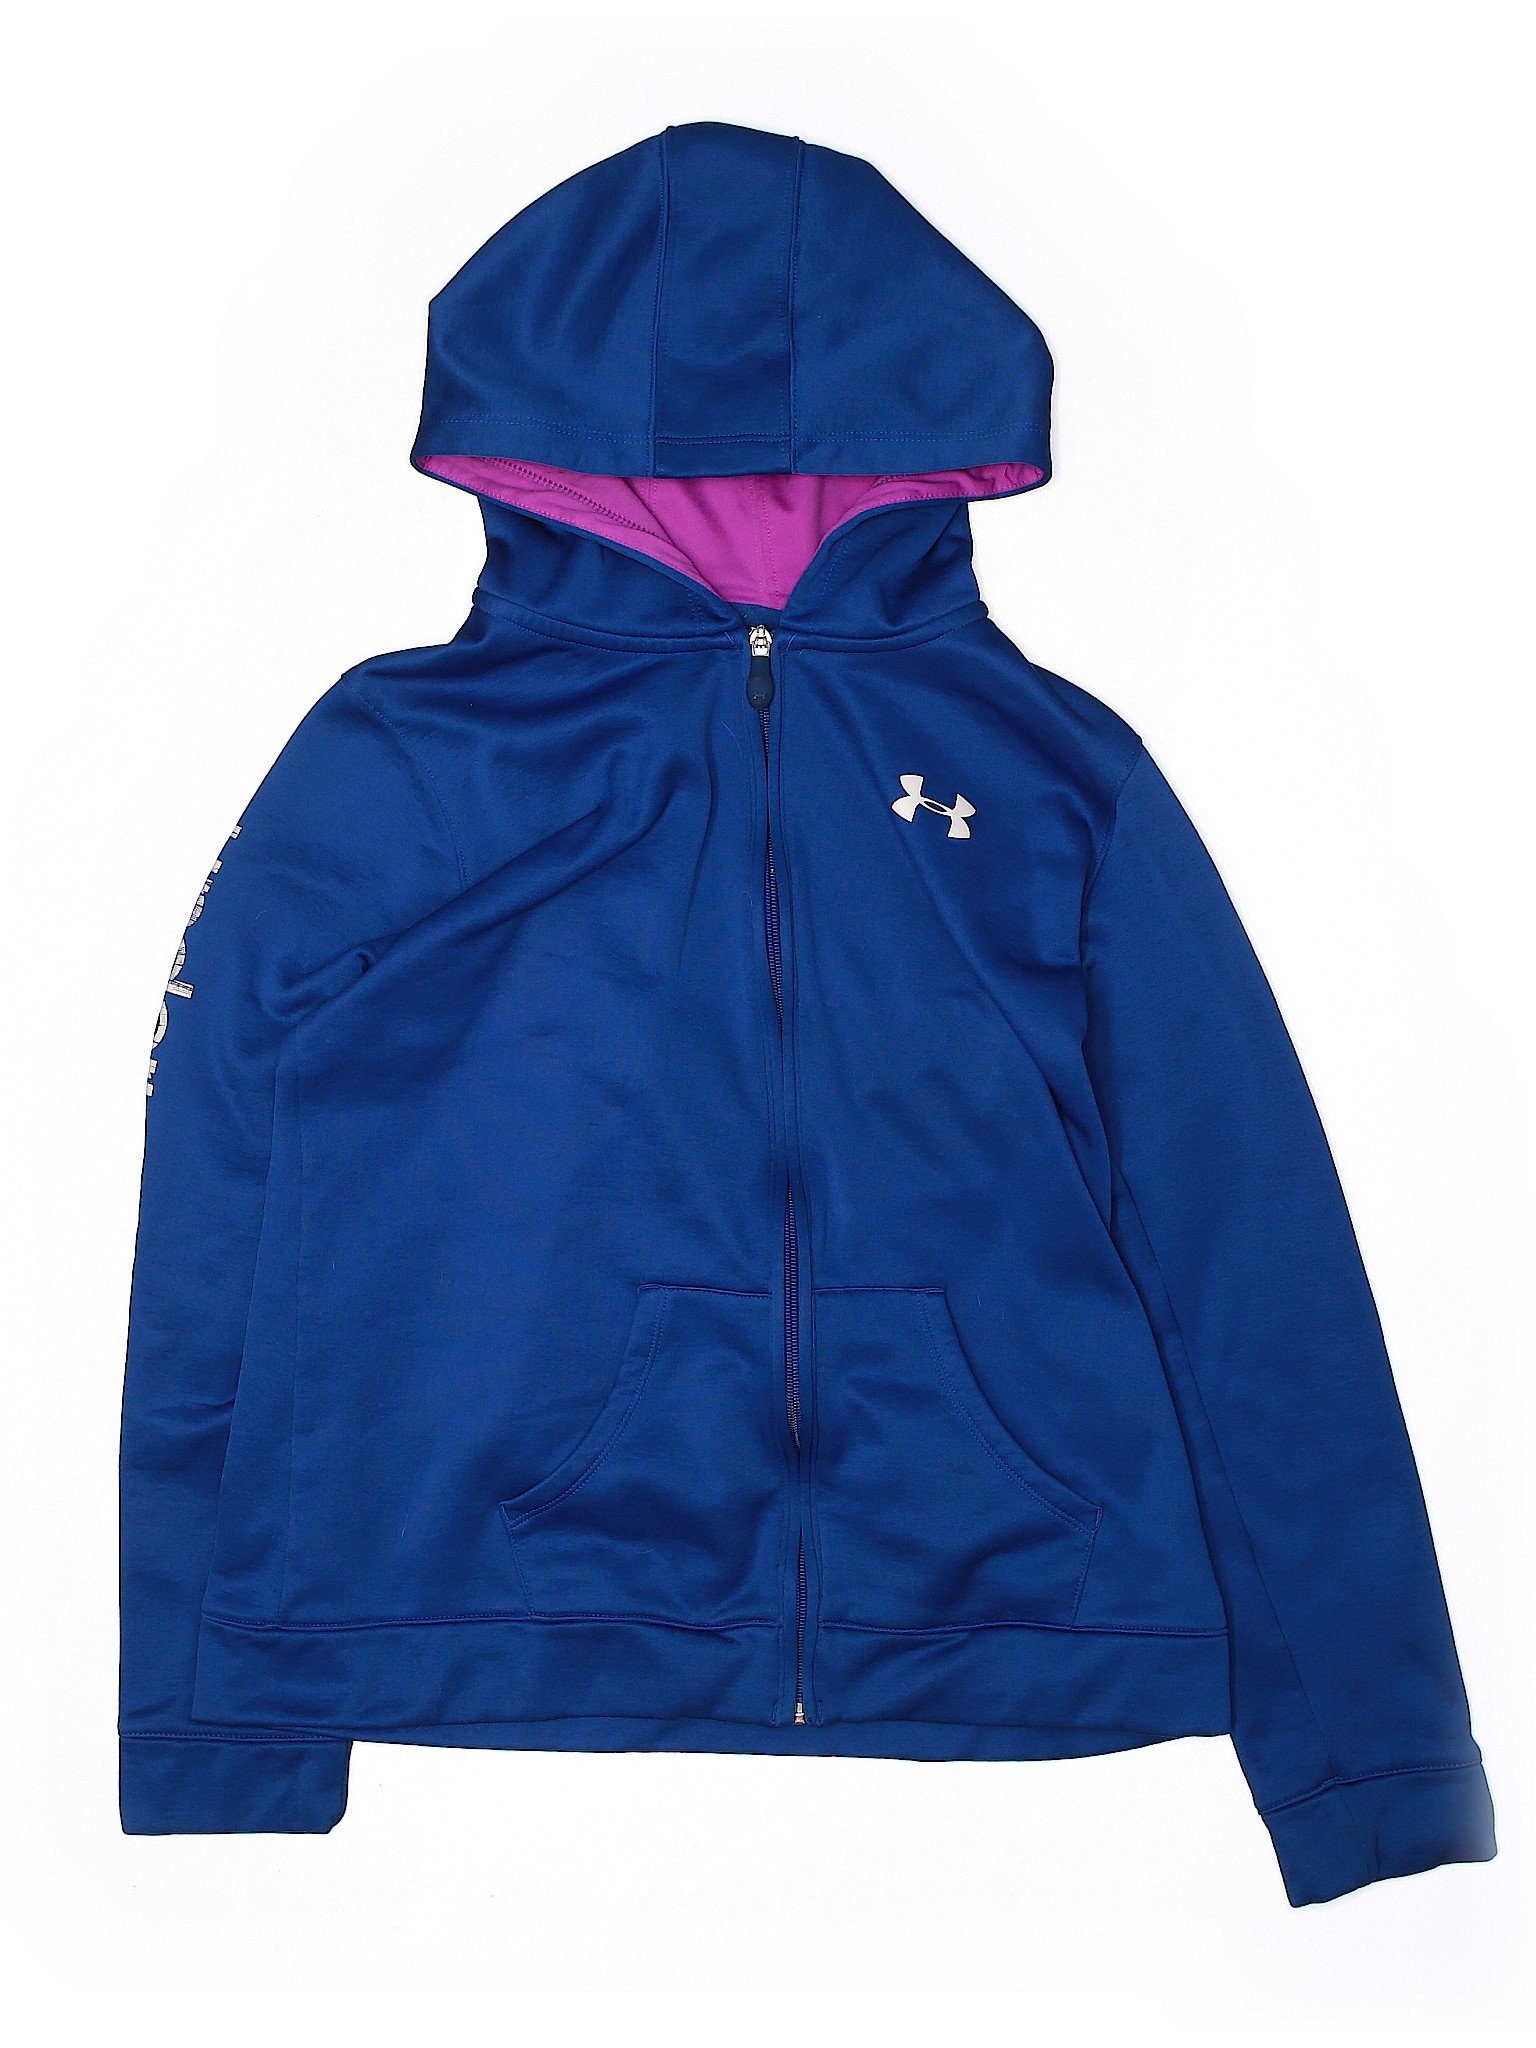 under armour hoodie sizing